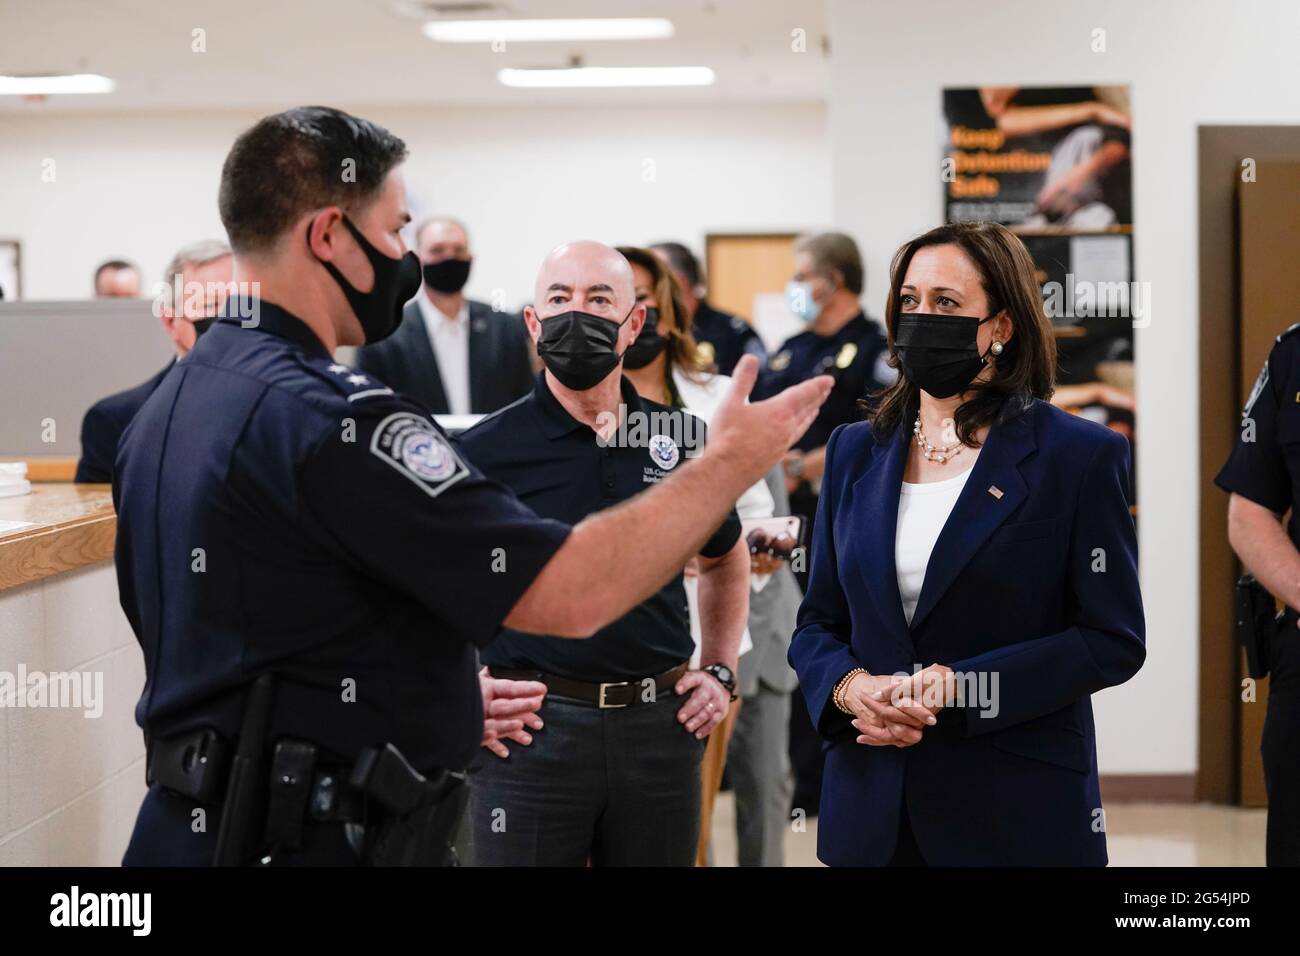 U.S. Vice President Kamala Harris and Department of Homeland Security Secretary Alejandro Mayorkas visit the Paso del Norte (PDN) Port of Entry in El Paso, Texas, June 25, 2021. U.S. Vice President visits the control area for asylum seekers upon entering Mexico, the secondary processing area for migrants and the outdoor vehicle inspection area used to screen vehicles crossing the border in search of goods or illegal activities. Photo by Yuri Gripas/Pool/Sipa USA Credit: Sipa USA/Alamy Live News Stock Photo